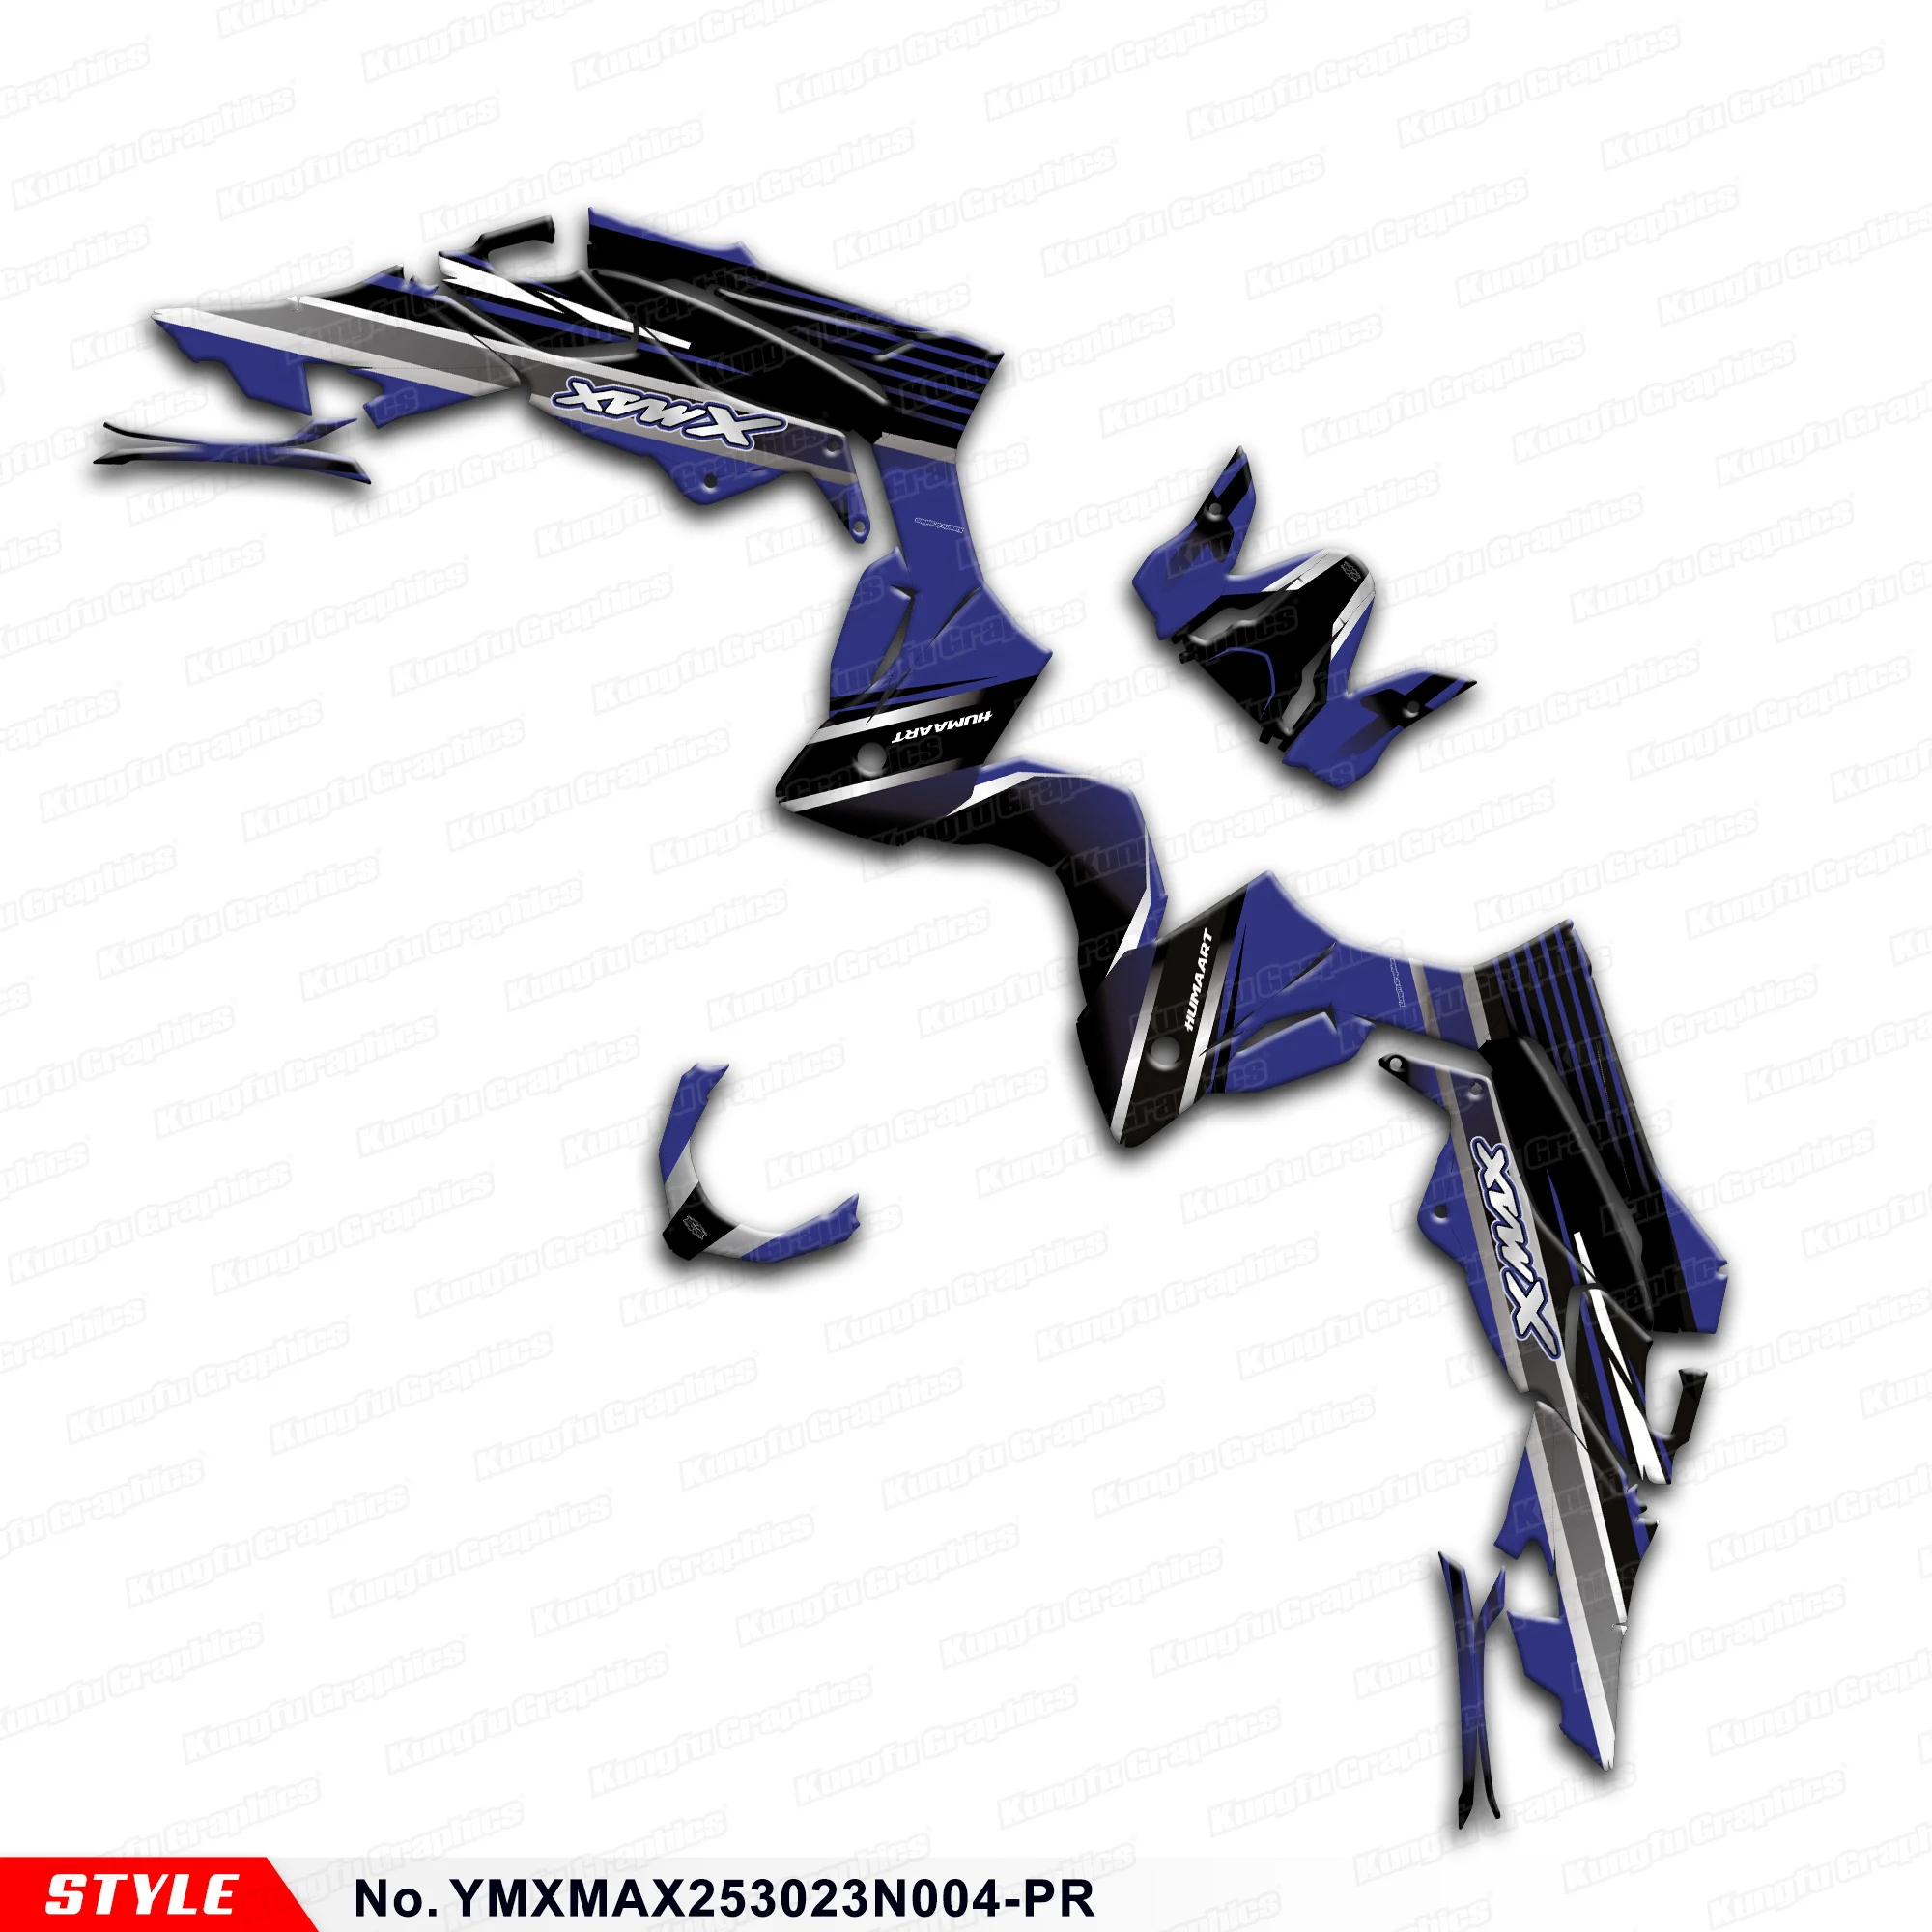 

Racing Graphics Decals Stickers Kit for Yamaha XMAX 250 300 2023 2024, YMXMAX253023N004-PR